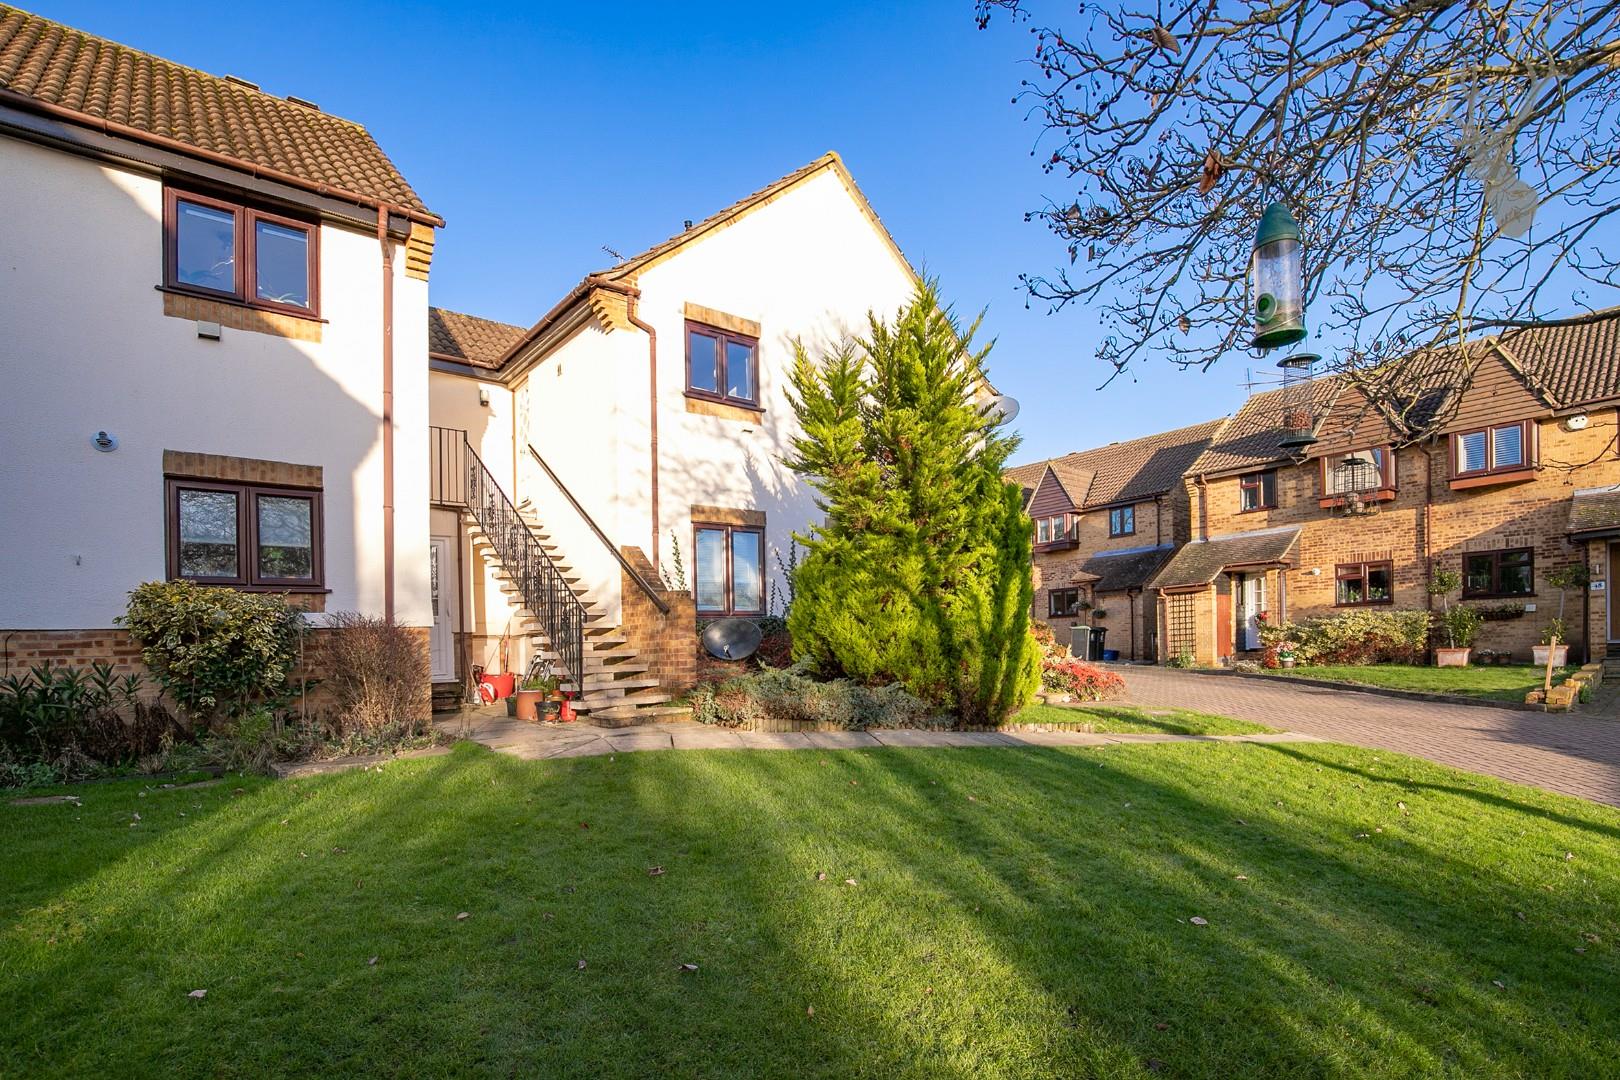 Similar Property: Flat - First Floor in Theydon Bois